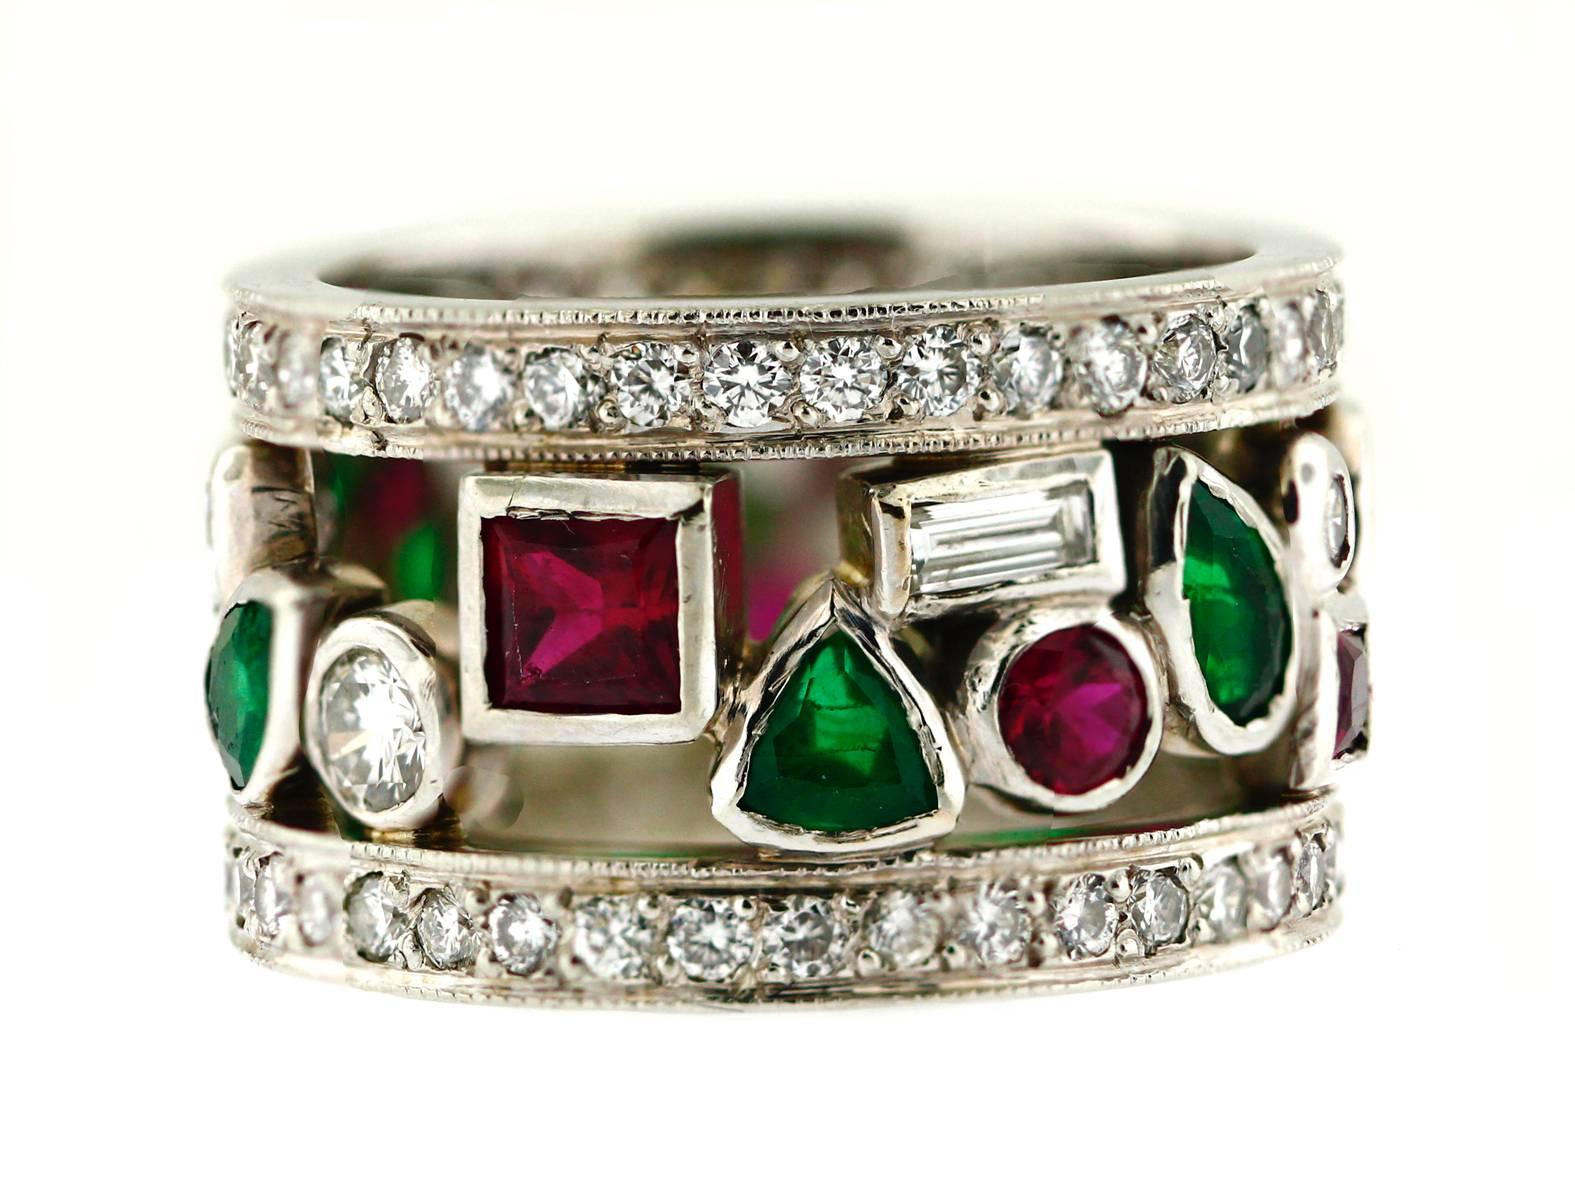 This beautiful band is clearly stamped 19KT. Additionally,this piece is trademarked. Two diamond encrusted eternity bands frame a patchwork of right crisp rubies, emeralds and diamonds. It is high quality and custom made with millgrain finishing.